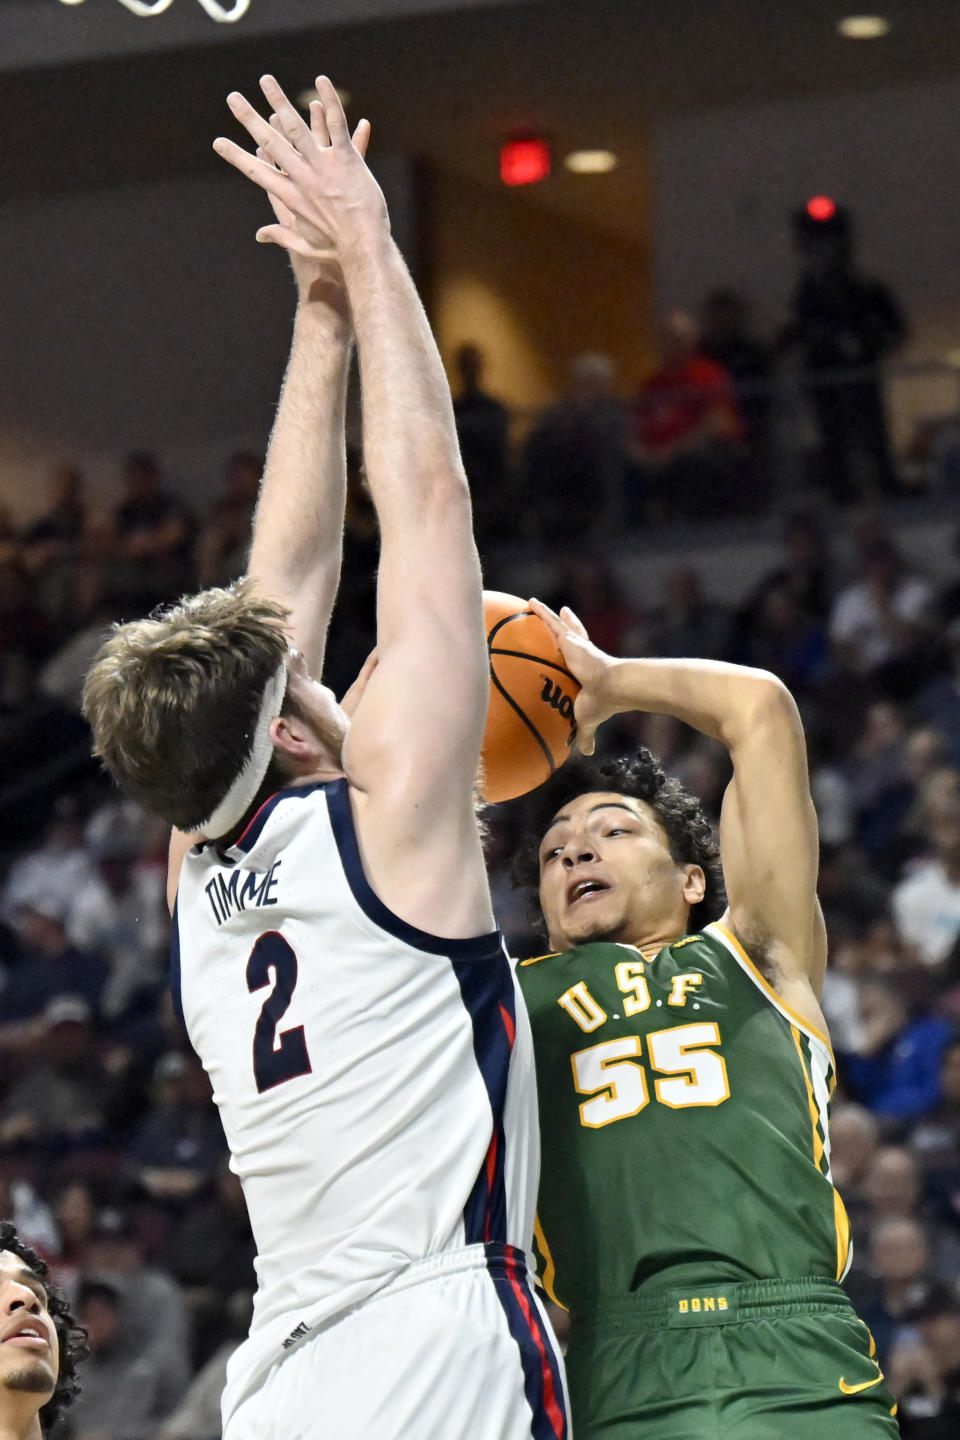 San Francisco guard Marcus Williams (55) shoots against Gonzaga forward Drew Timme (2) during the first half of an NCAA college basketball game in the semifinals of the West Coast Conference men's tournament Monday, March 6, 2023, in Las Vegas. (AP Photo/David Becker)